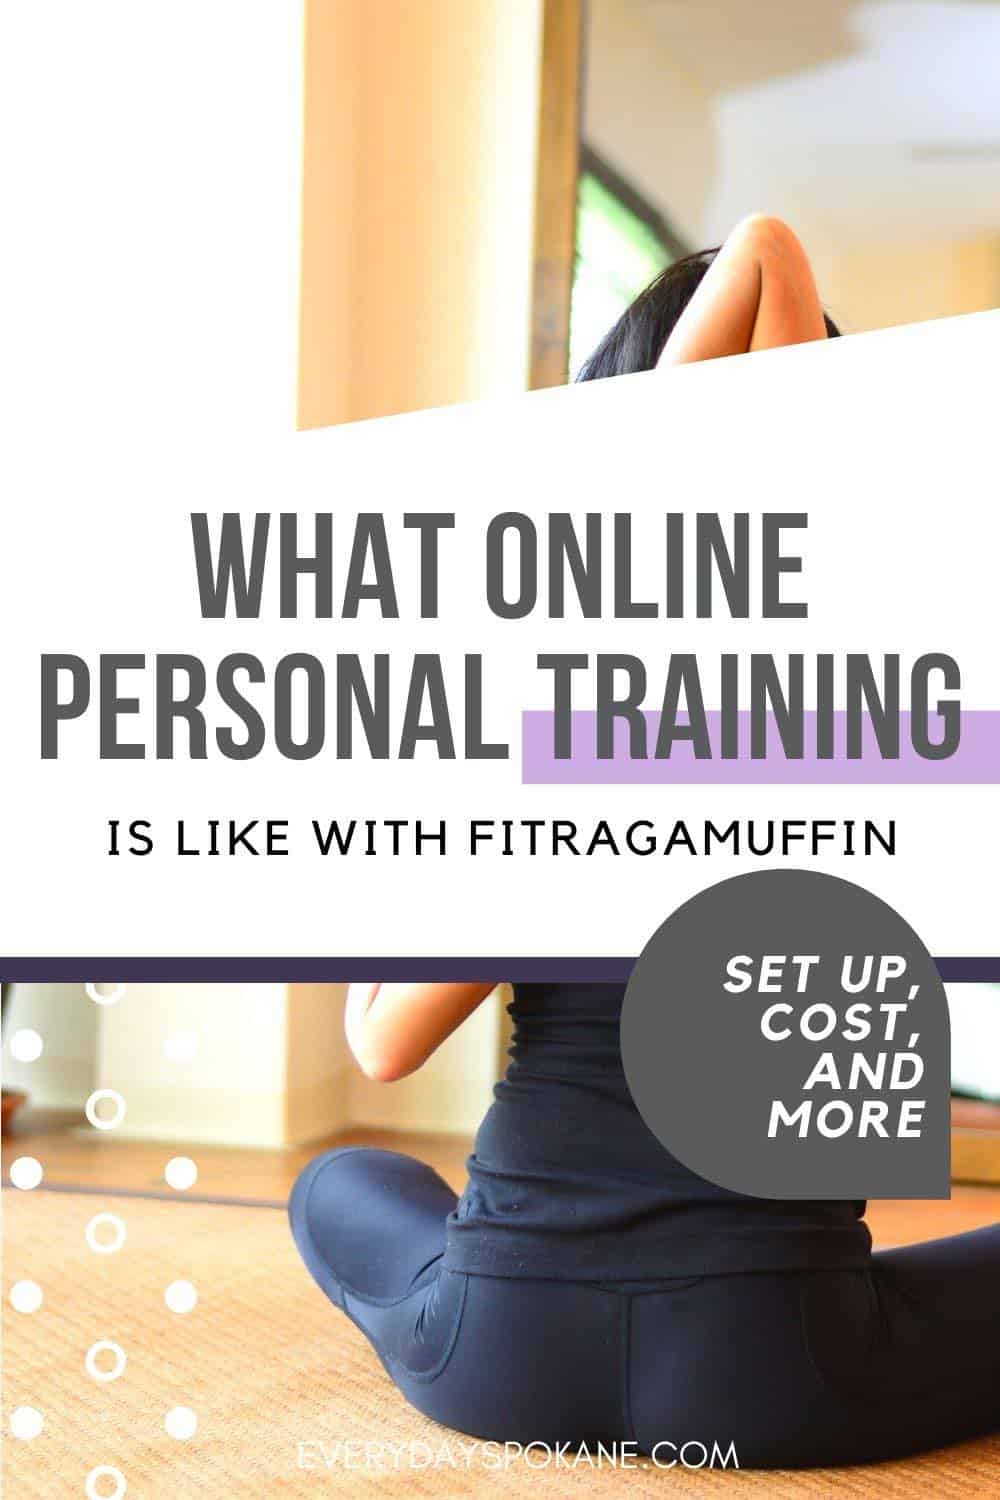 virtual personal training with fitragamuffin